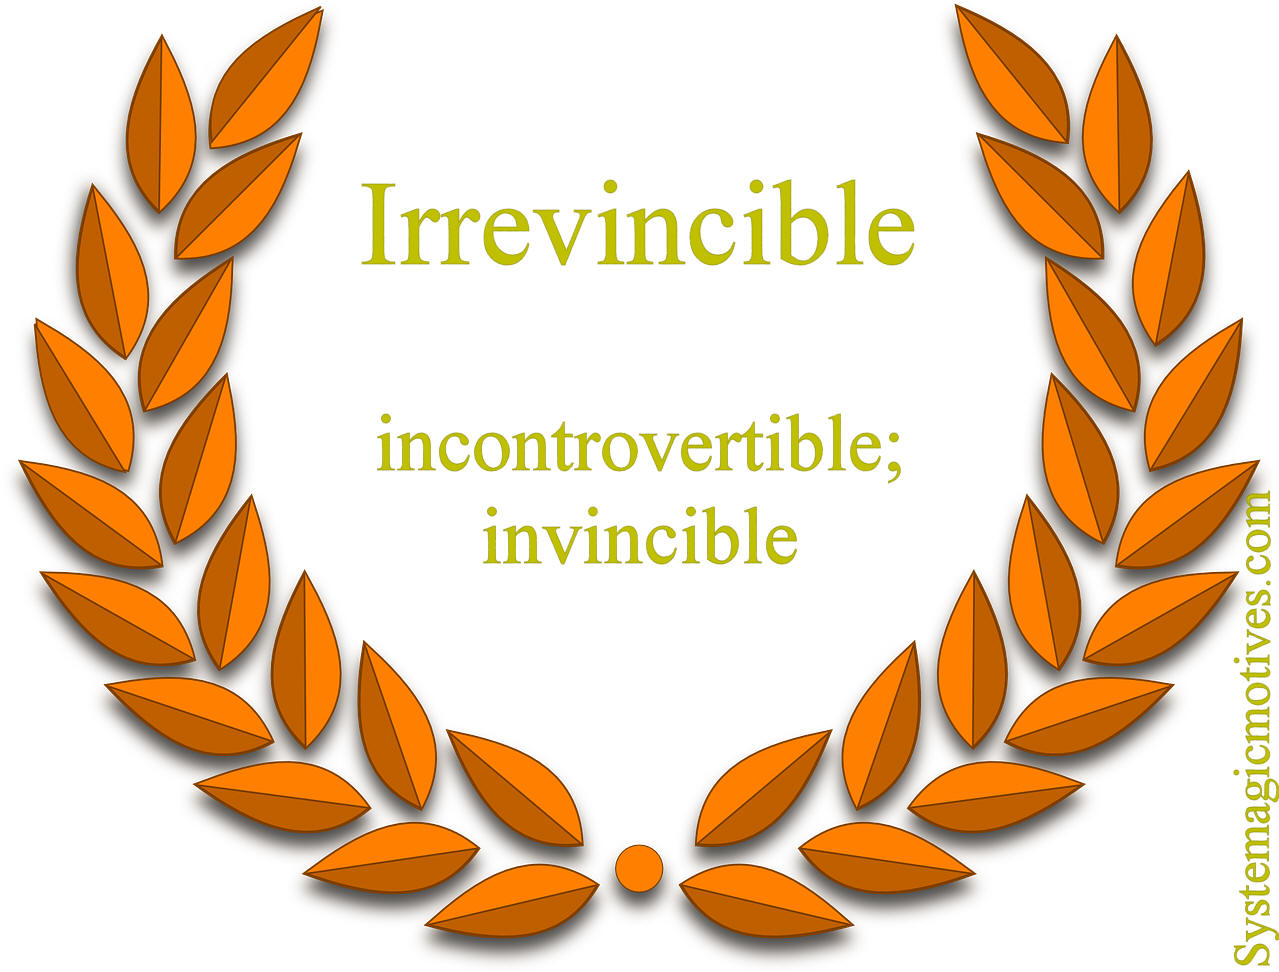 Graphic Definition of Irrevincible